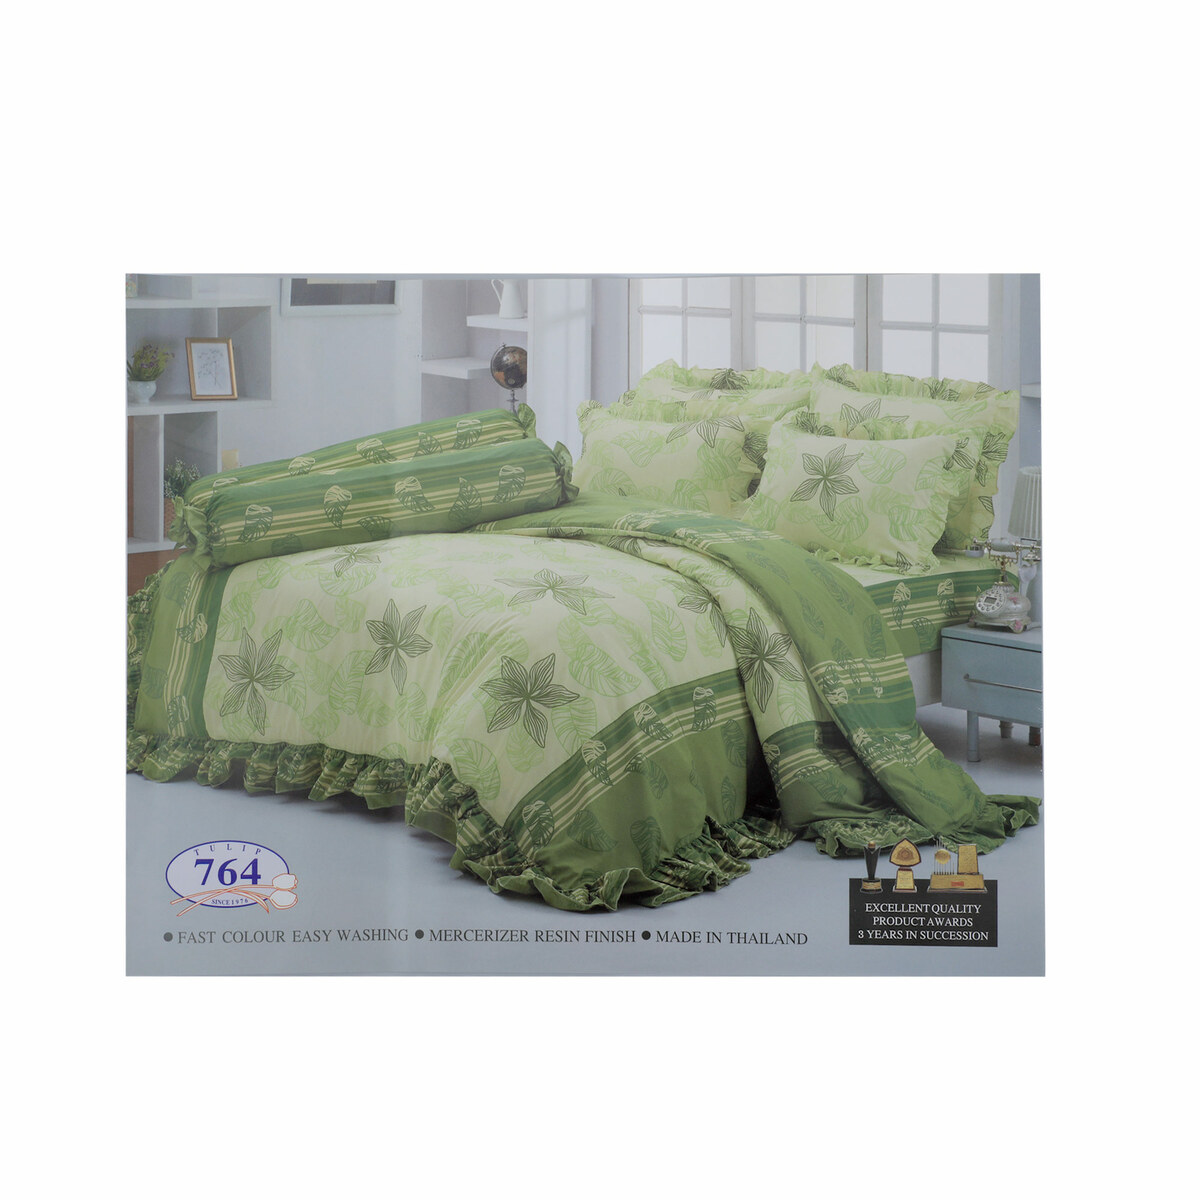 Tulip Bed Sheet - Double Assorted